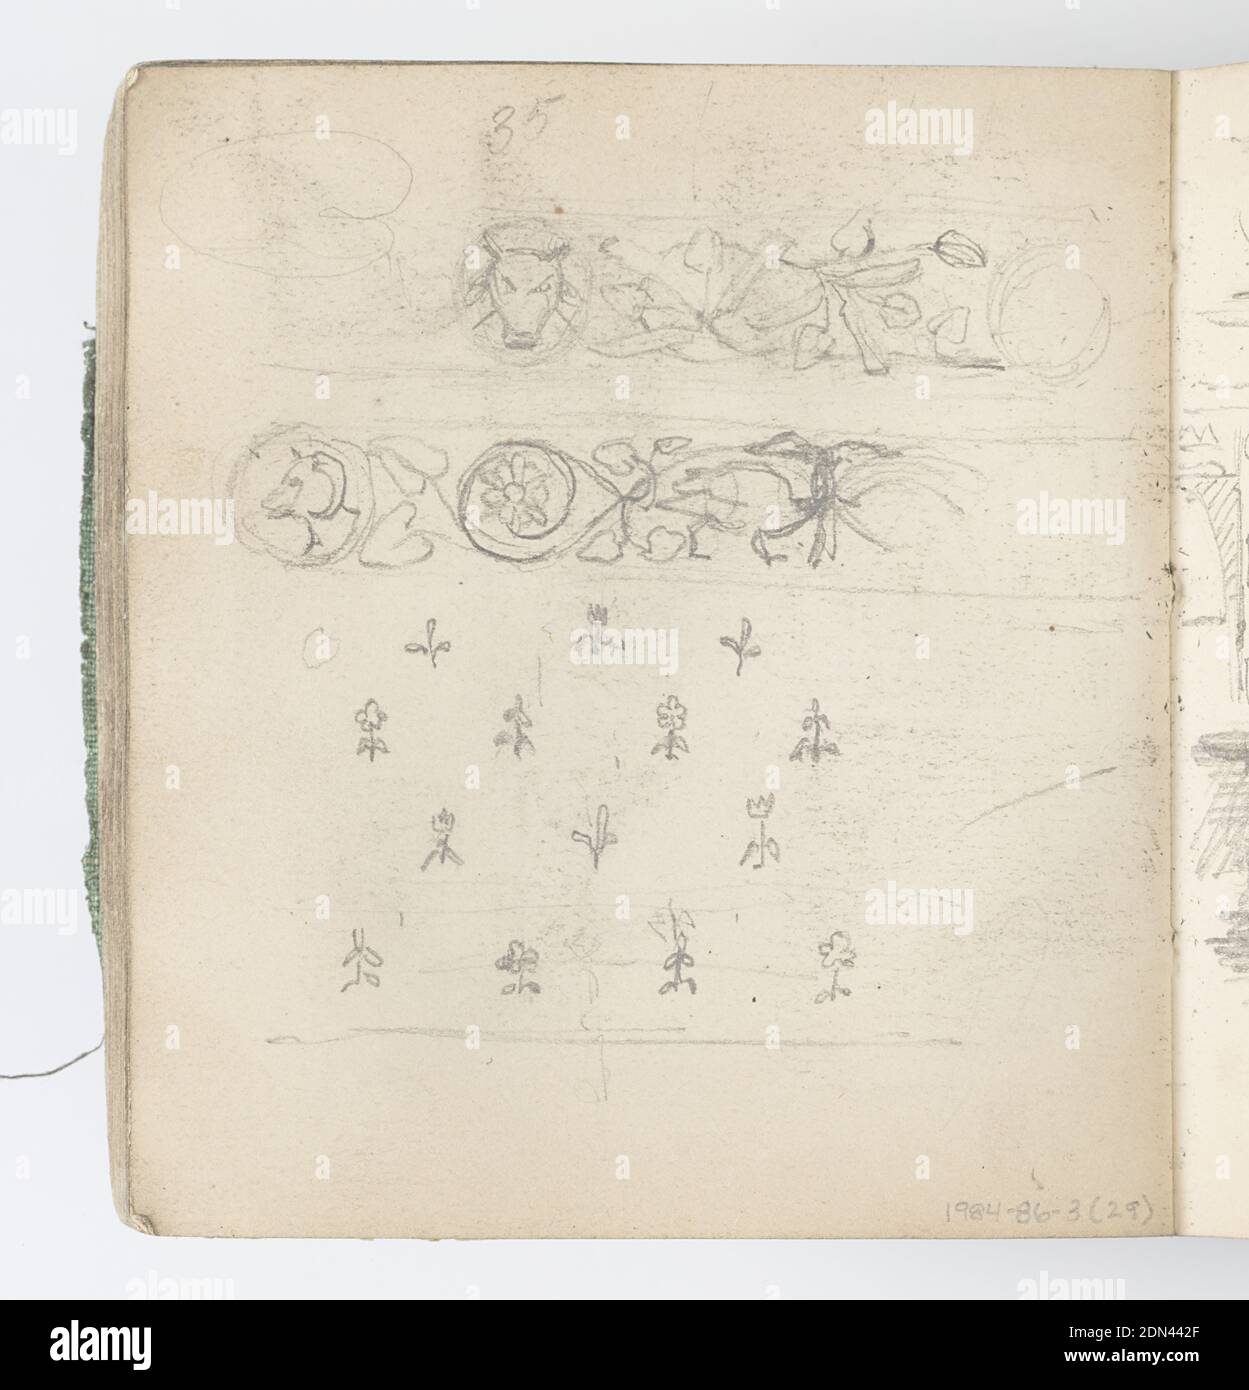 Sketchbook Page: Three-Lobed Leaf, Kenyon Cox, American, 1856–1919, Graphite on paper, Recto: Study of a three-lobed leaf; sketch of decorative motif below, with four symmetrical three-lobed leaves., Verso: Sketch of two decorative friezes, above, and pattern with flowers, below., USA, 1874, albums (bound) & books, Sketchbook folio, Sketchbook folio Stock Photo